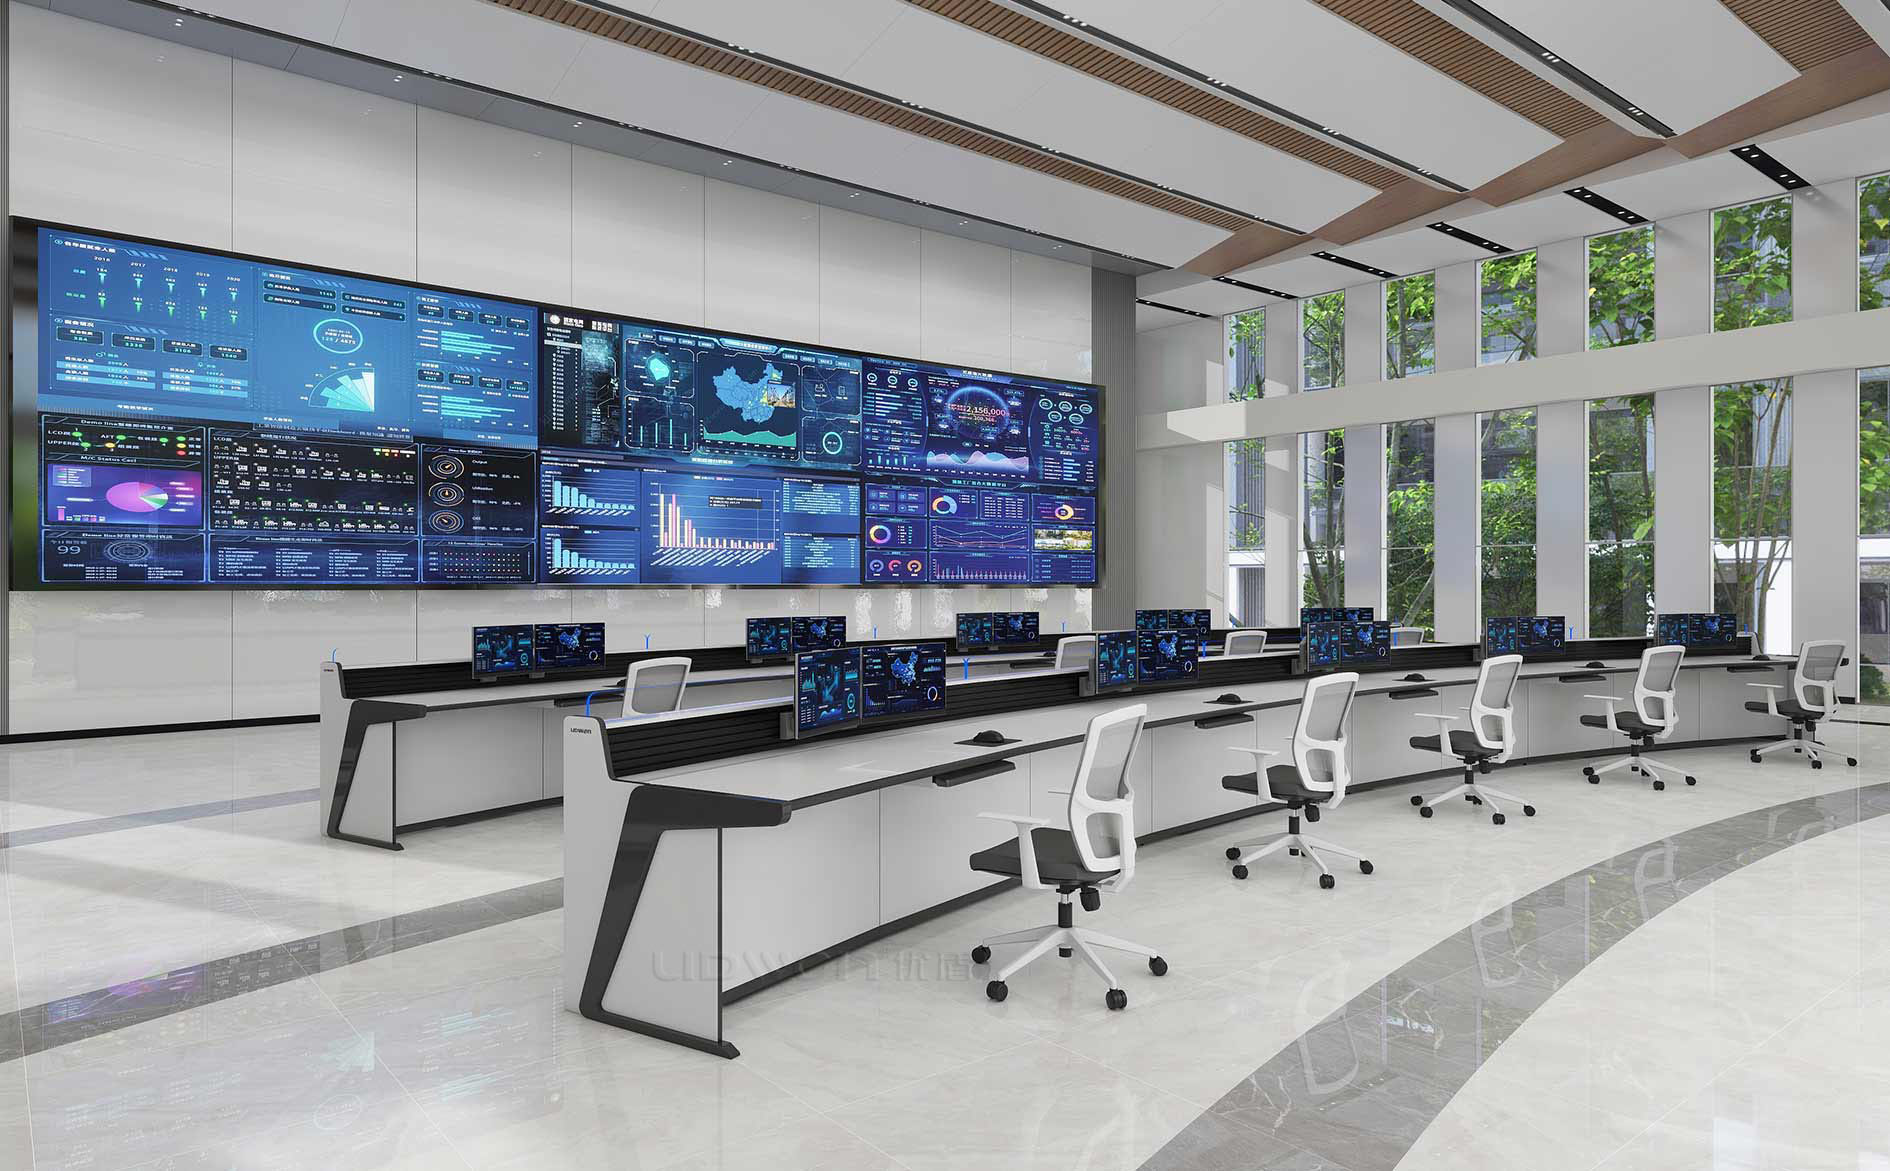 Control Room Upgrade Plan: Optimizing Console Design to Enhance Work Efficiency